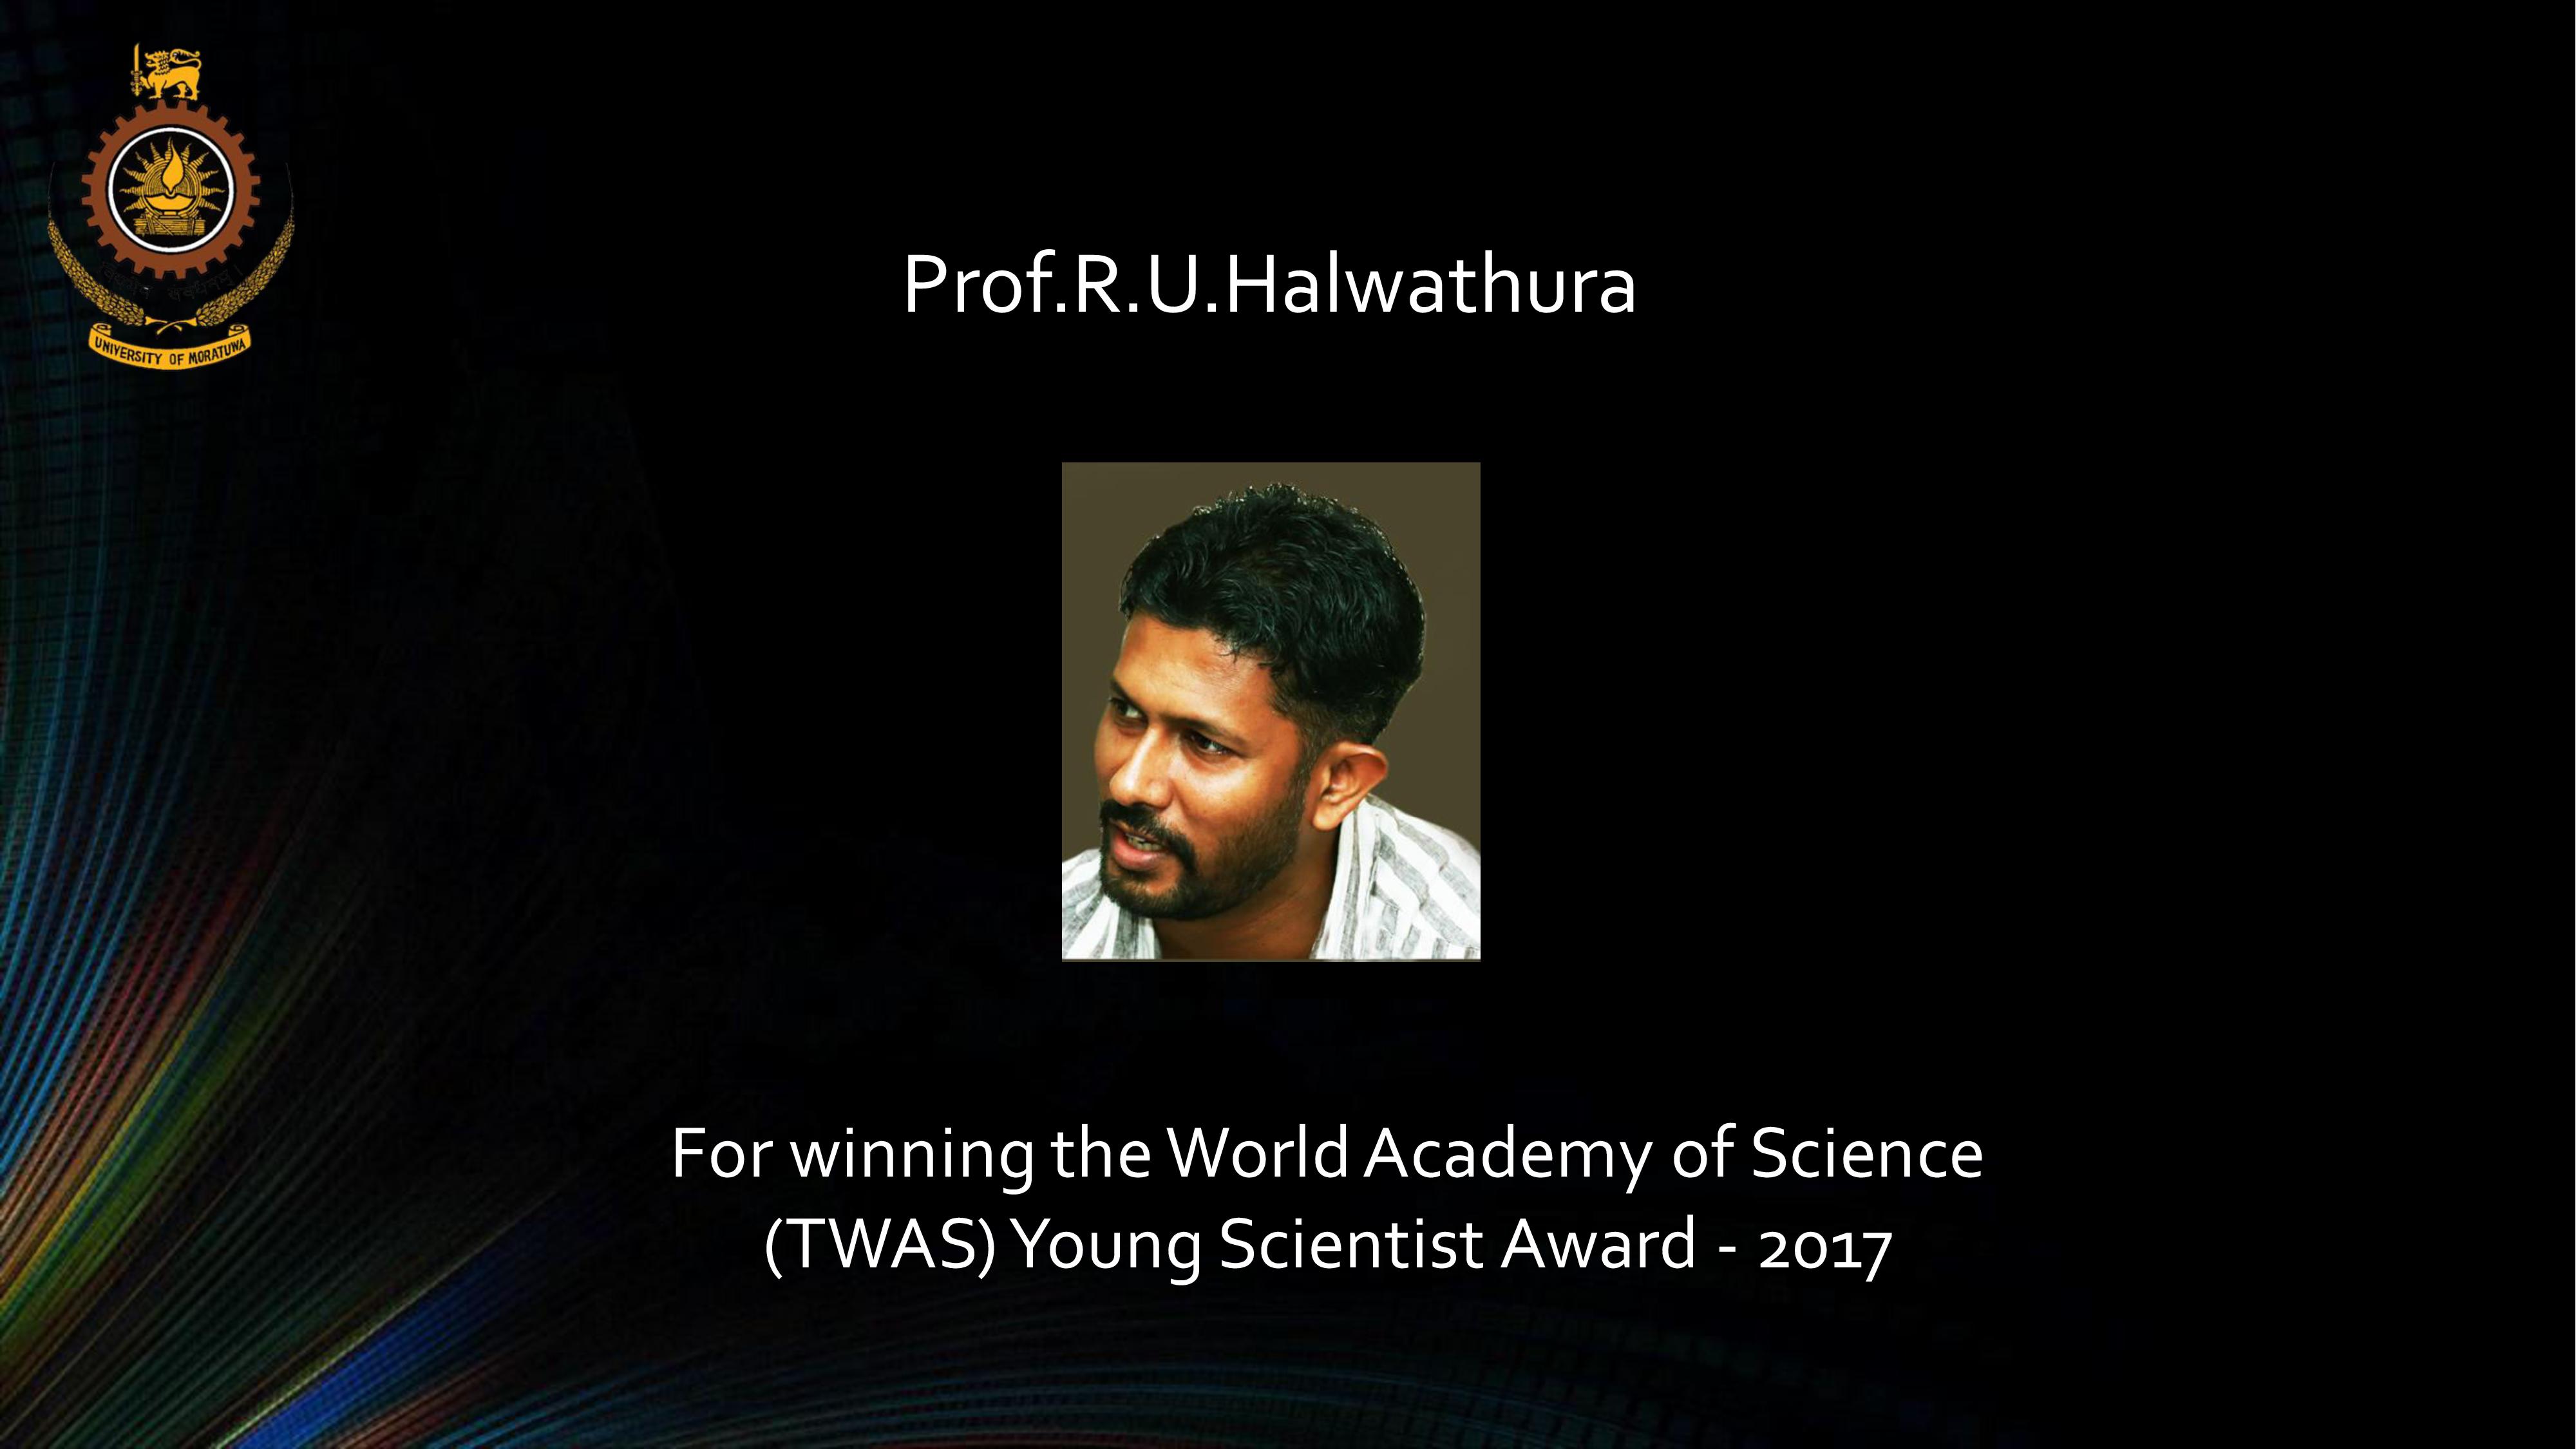 Winner of the World Academy of Science (TWAS) Young Scientist Award 2017